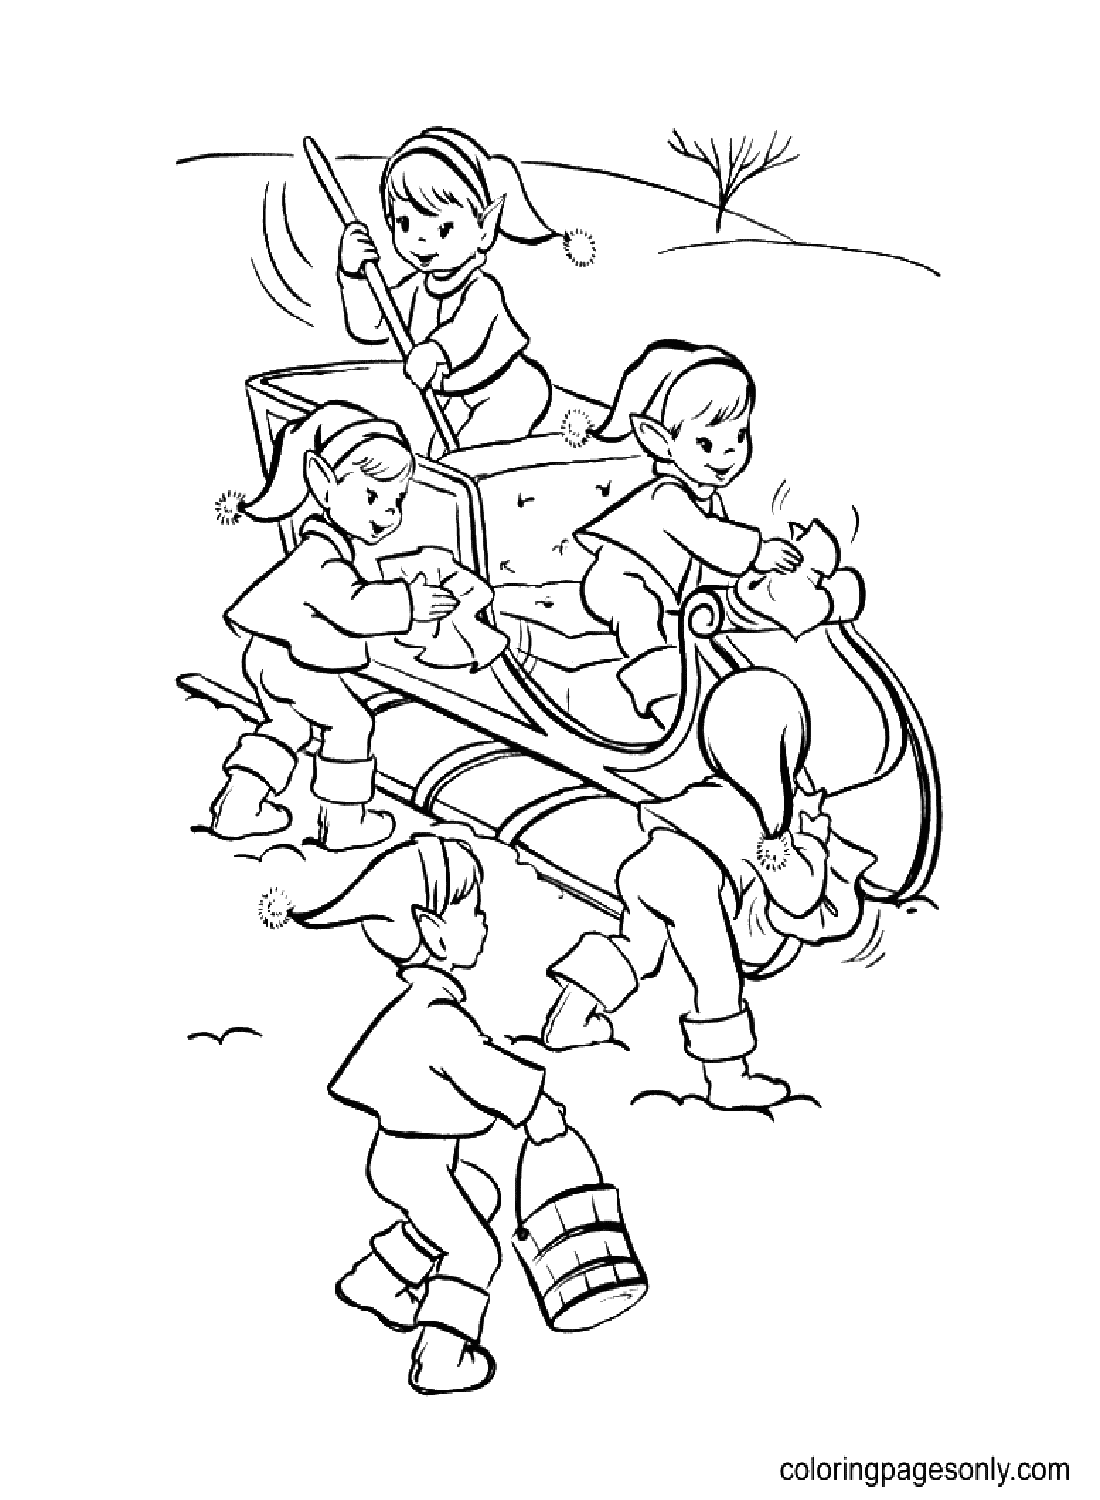 The Elves Clear The Carriage For Santa Claus Coloring Page